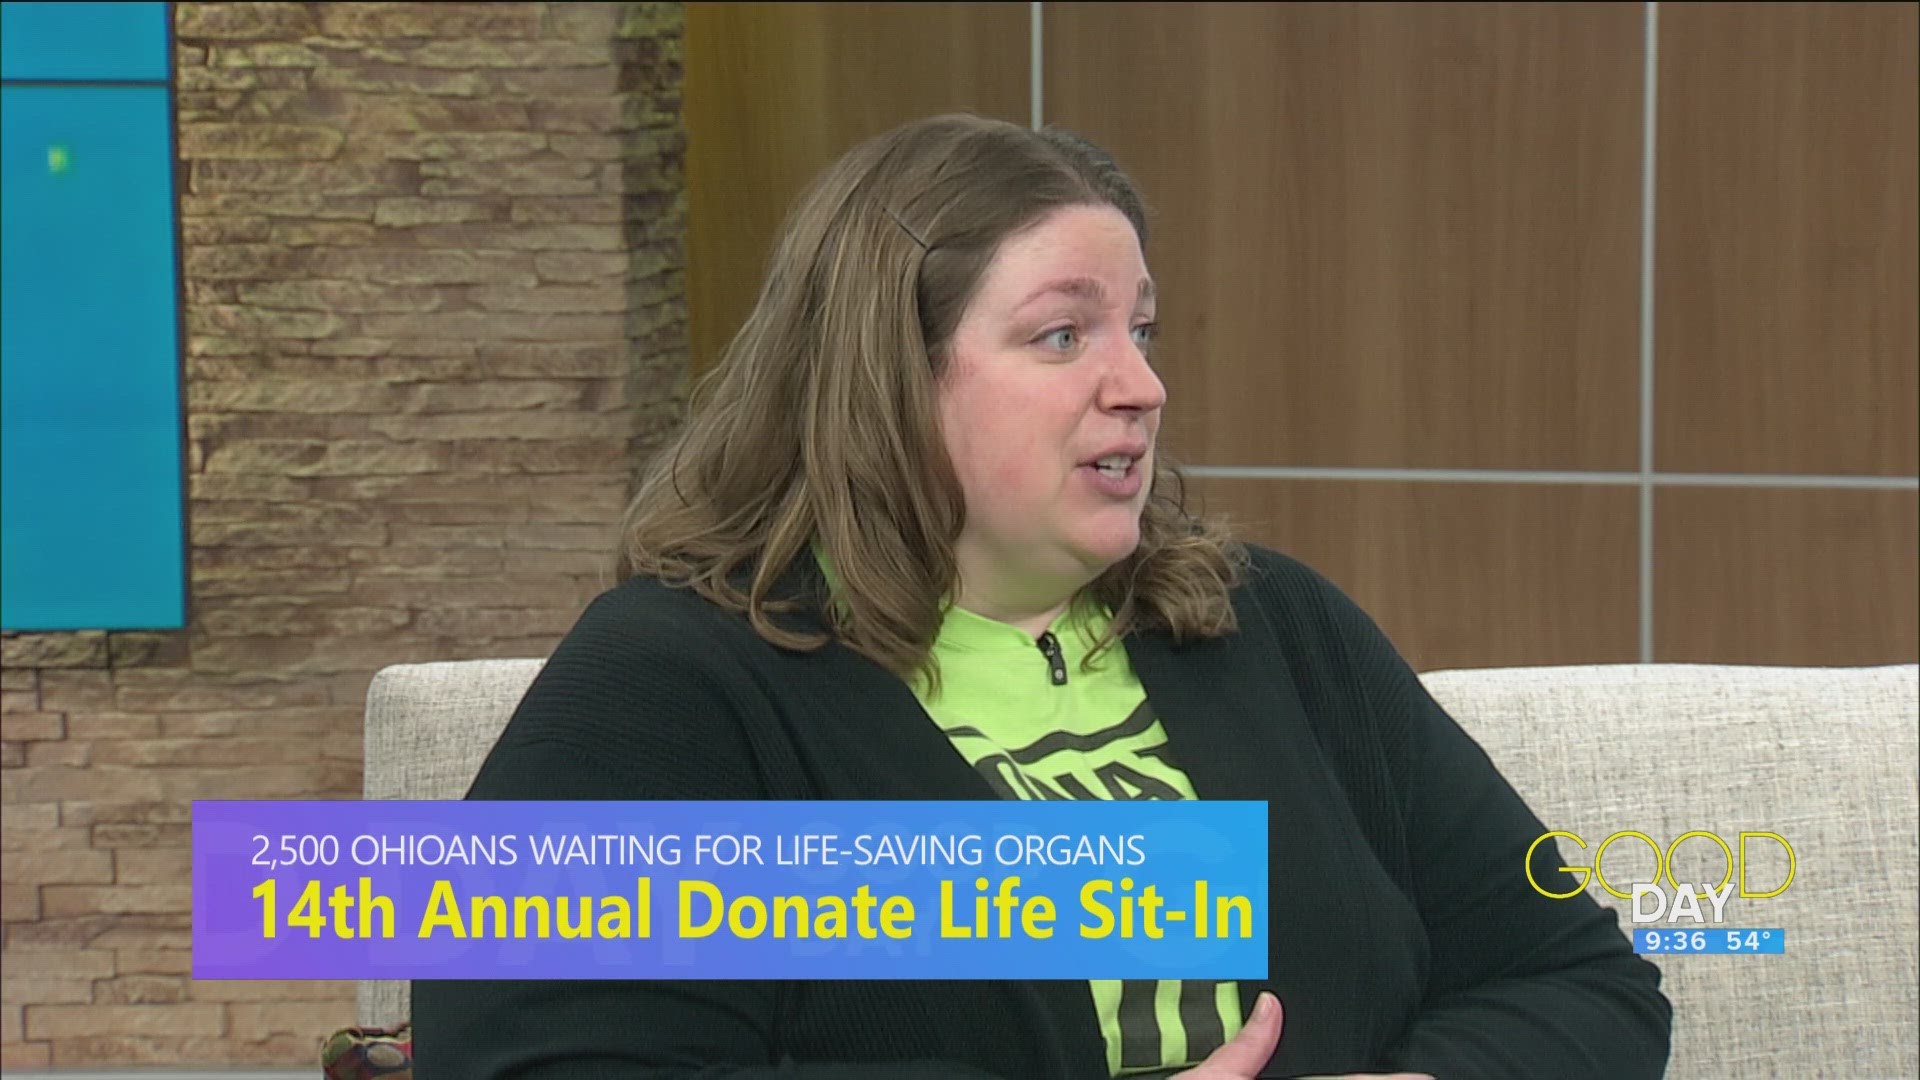 Kara Steele of Life Connection of Ohio talks the 14th annual donate life sit-in, promoting organ, eye and tissue donation.